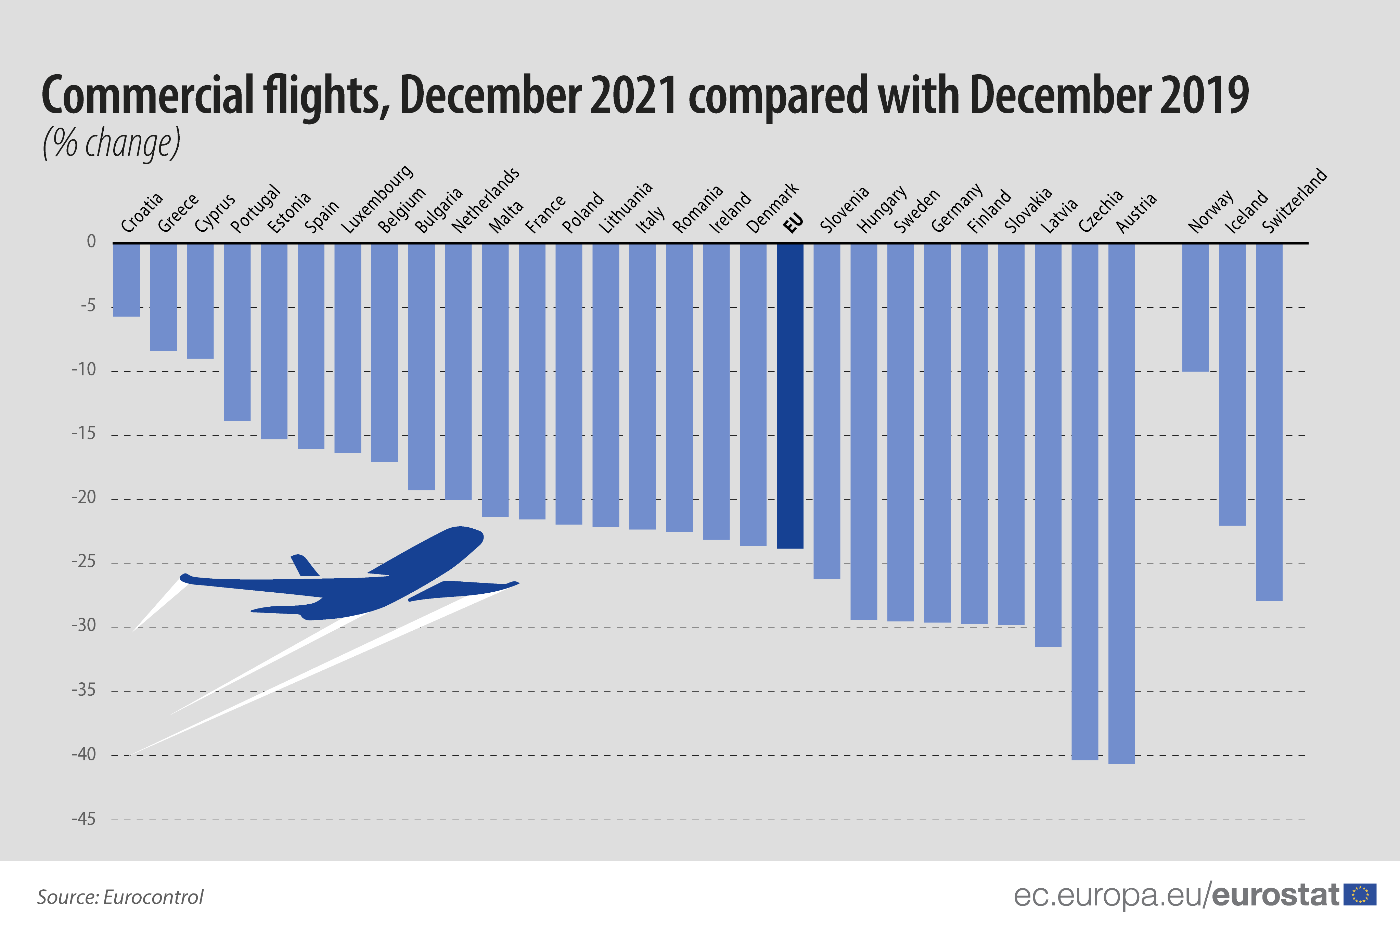 Commercial flights in December 2021 closest yet to 2019 figures